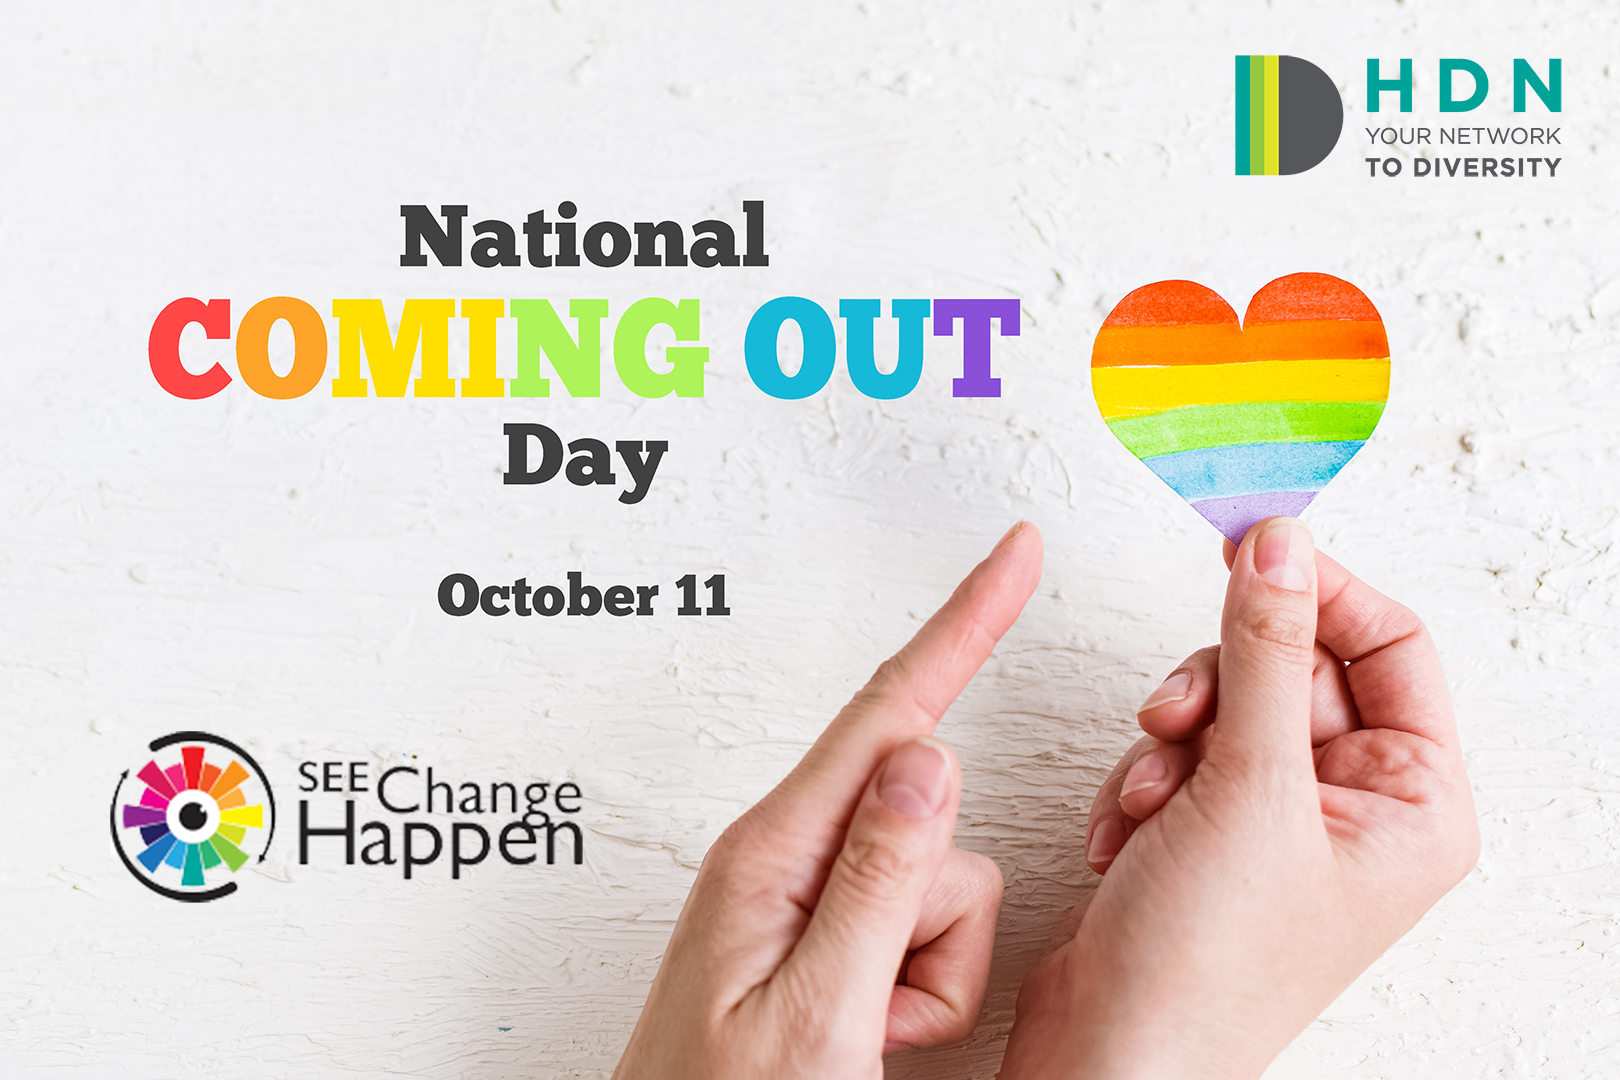 National Coming Out Day Housing Diversity Network